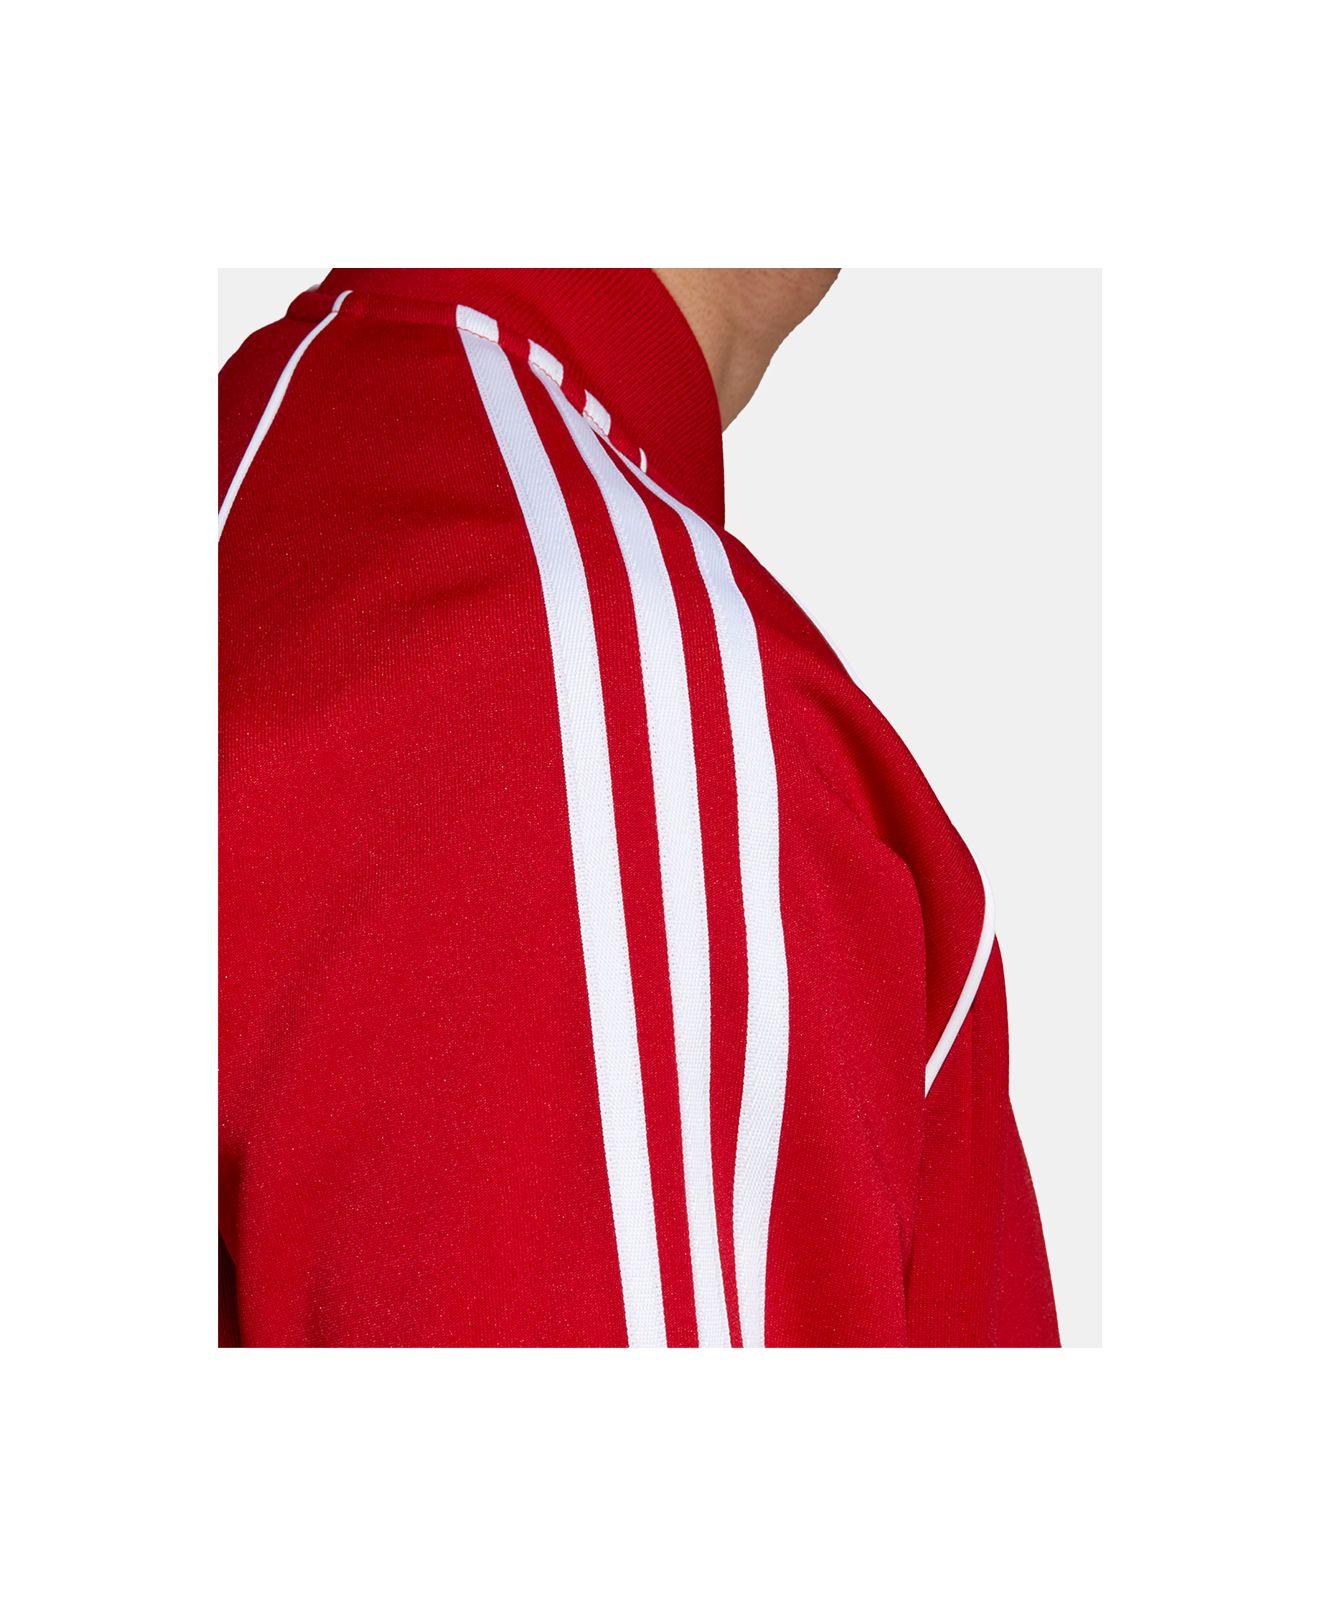 adidas Superstar Track Jacket in Red for Men - Lyst